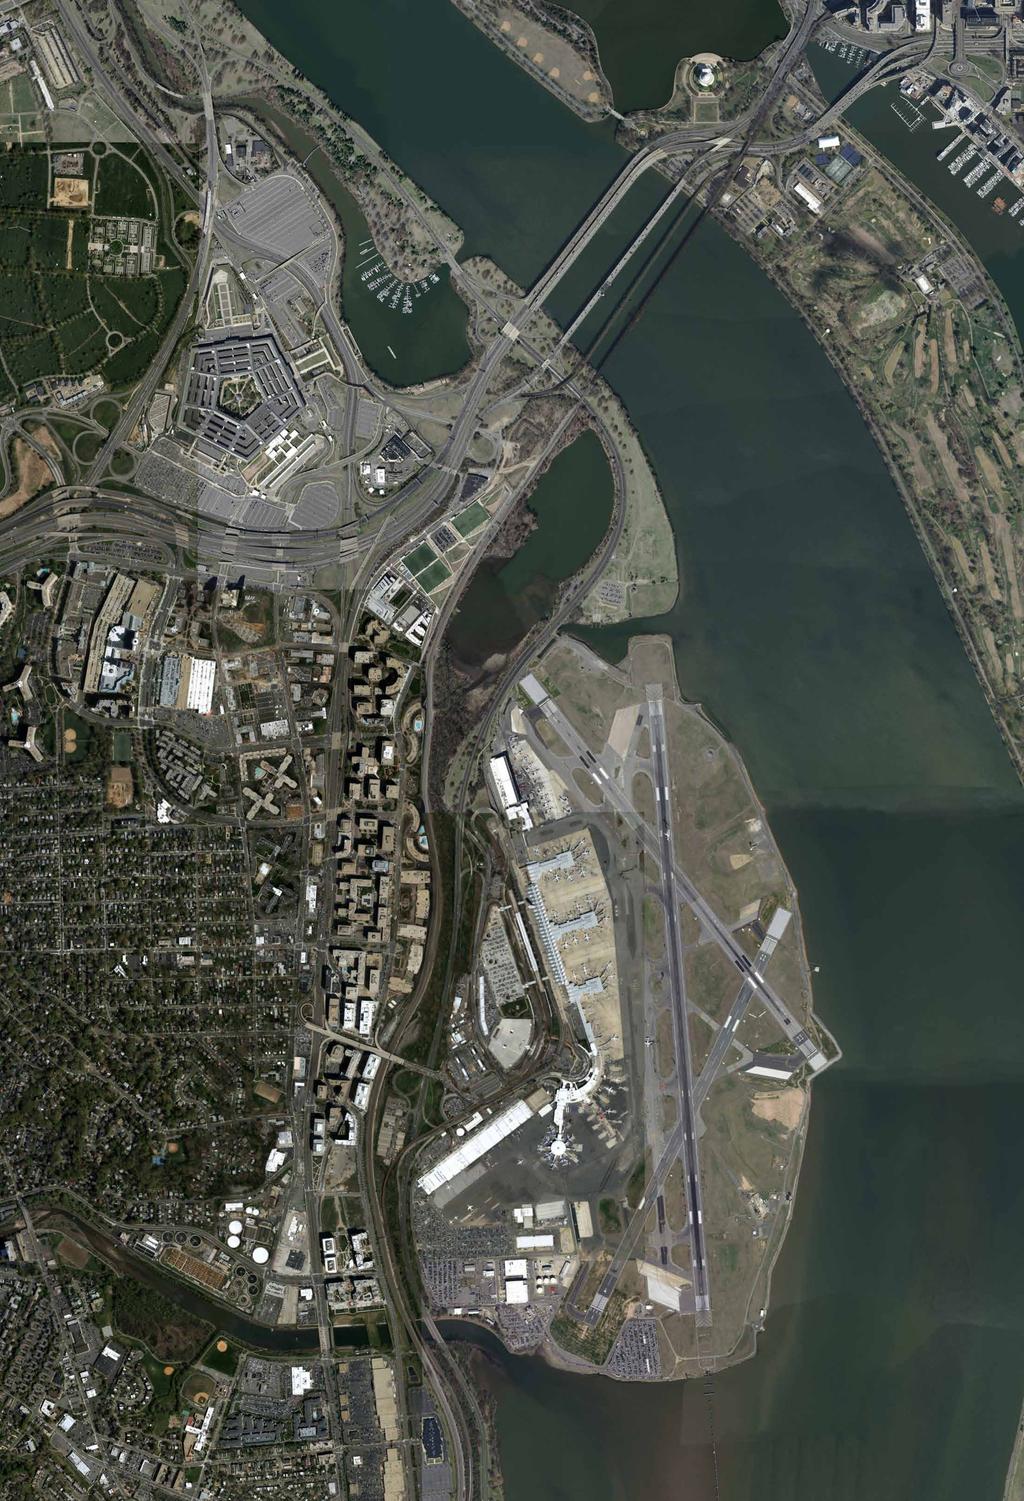 Design Objectives Build an island platform Serve 10 cars Pentagon Long Bridge Project East Potomac Park Provide two grade-separated access points Stay within existing rail right-of-way Long